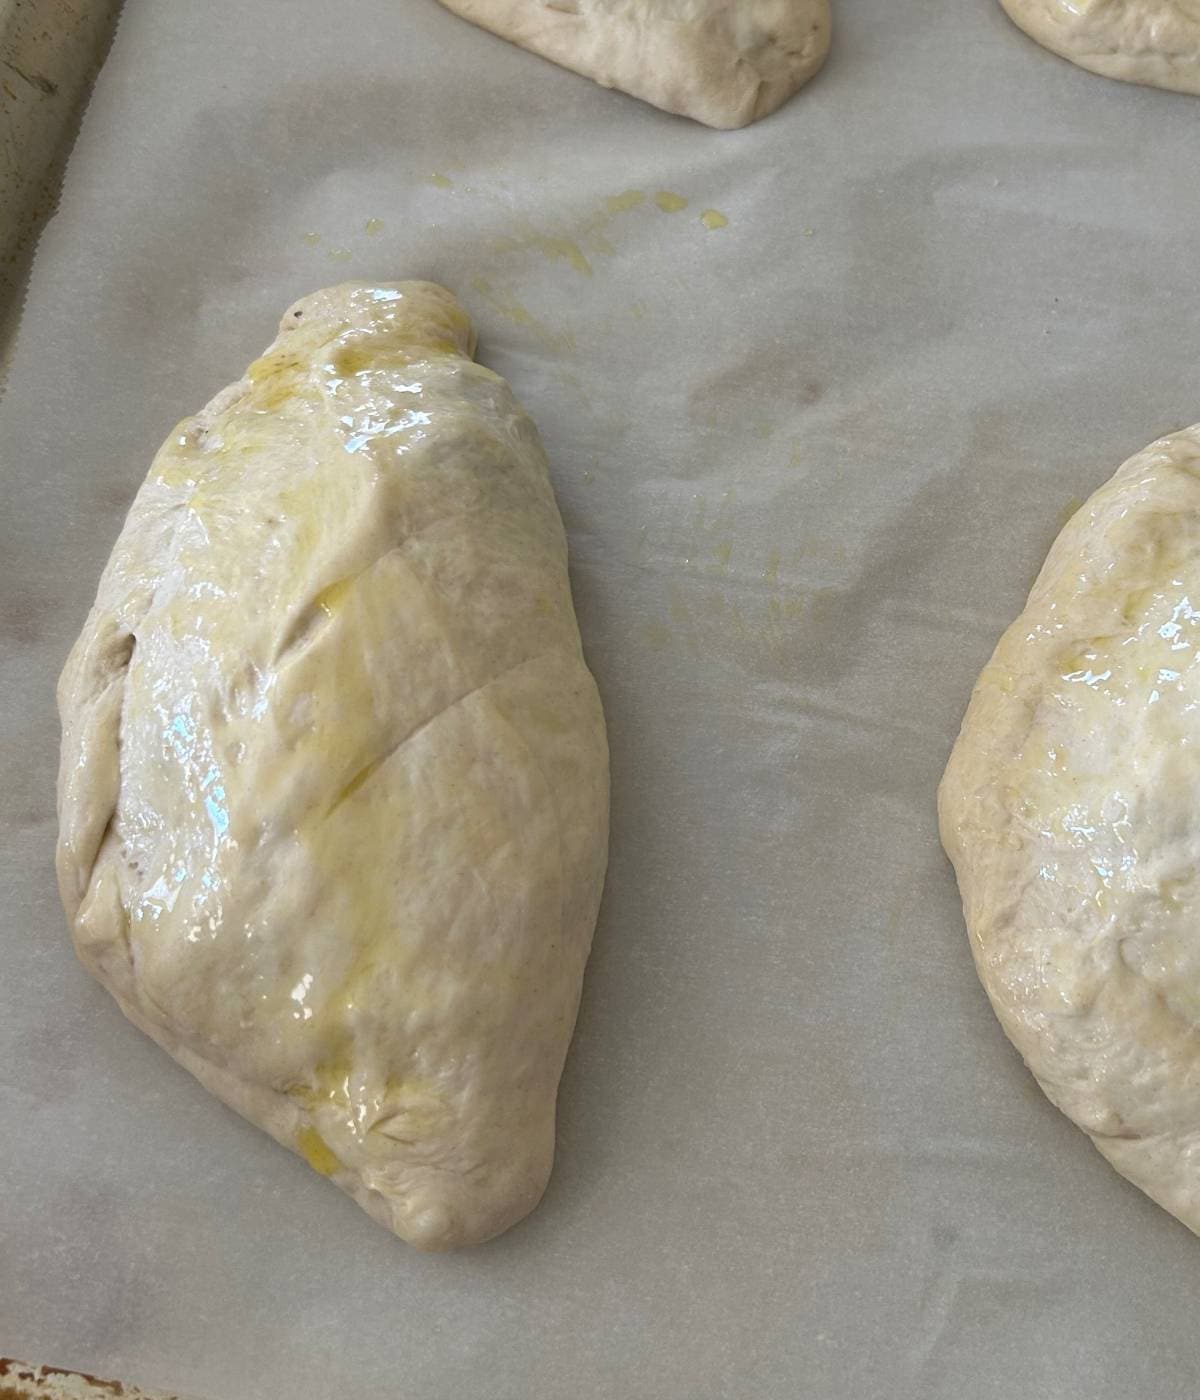 Steak and cheese Calzone ready to bake.